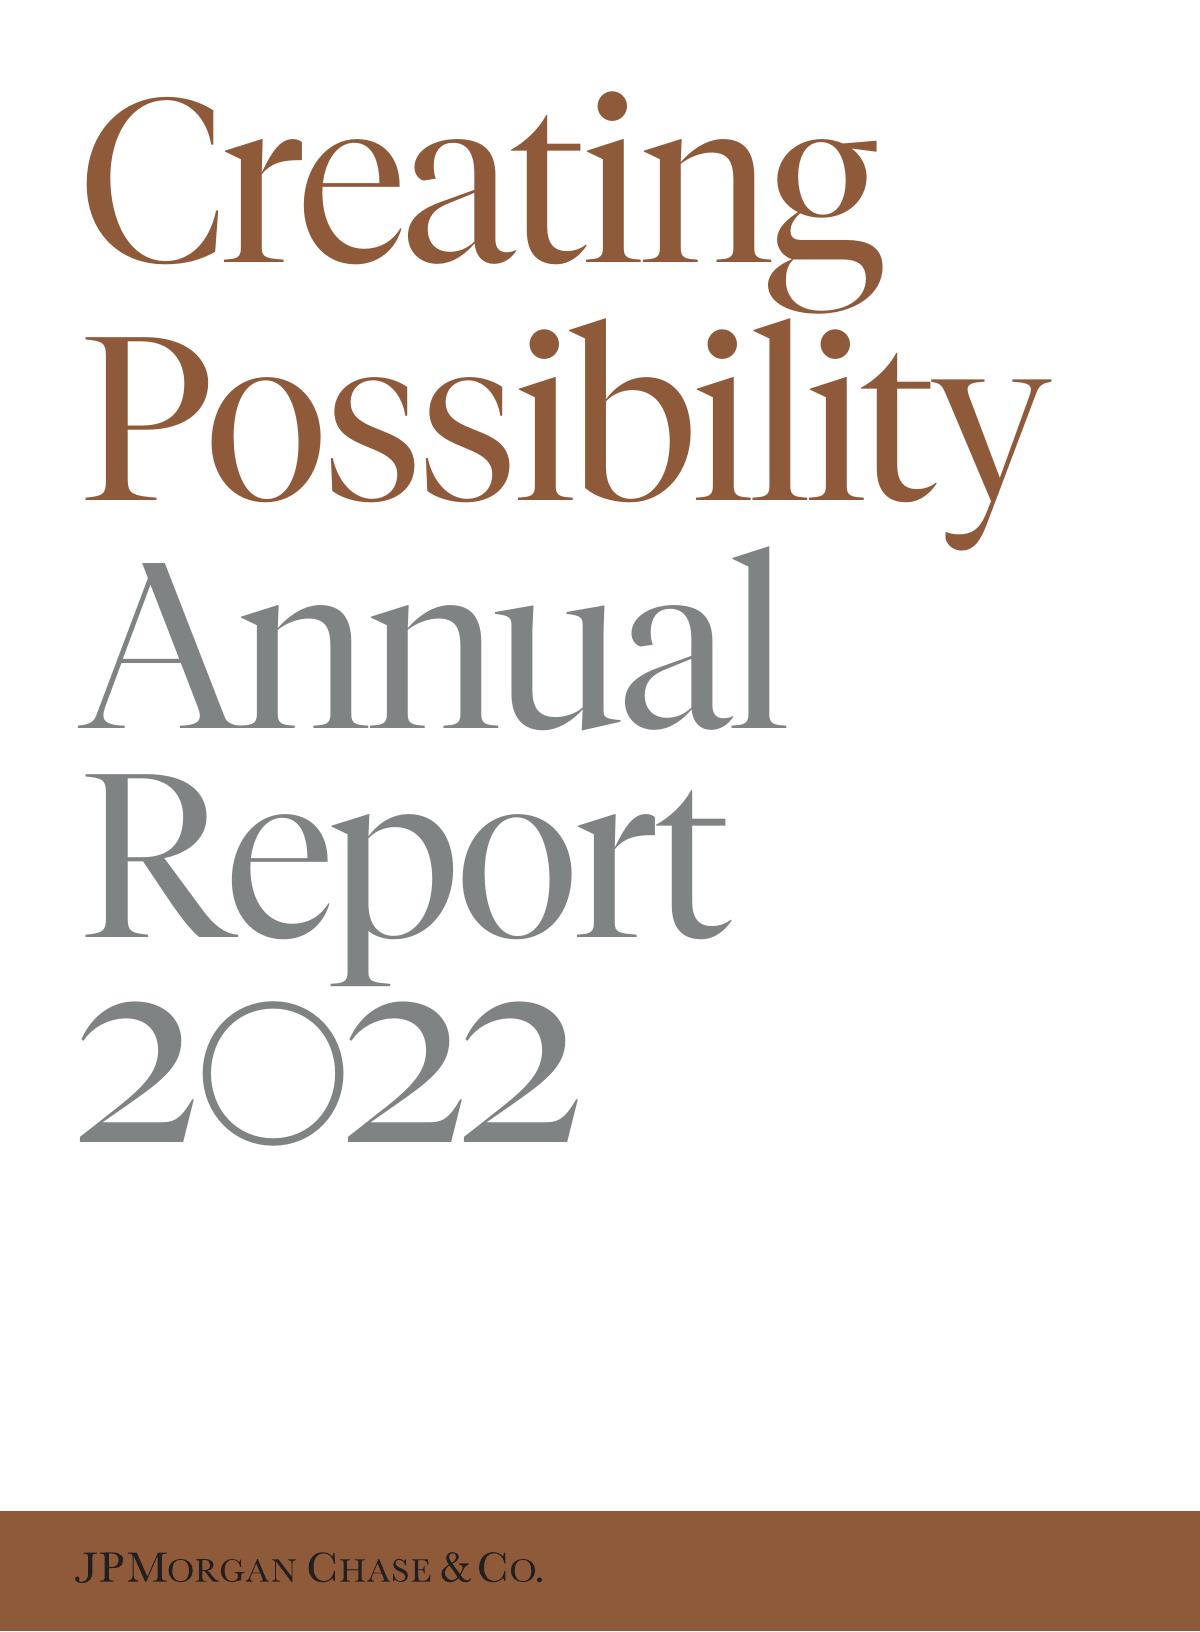 SBCOLLEGE 2022 Annual Report